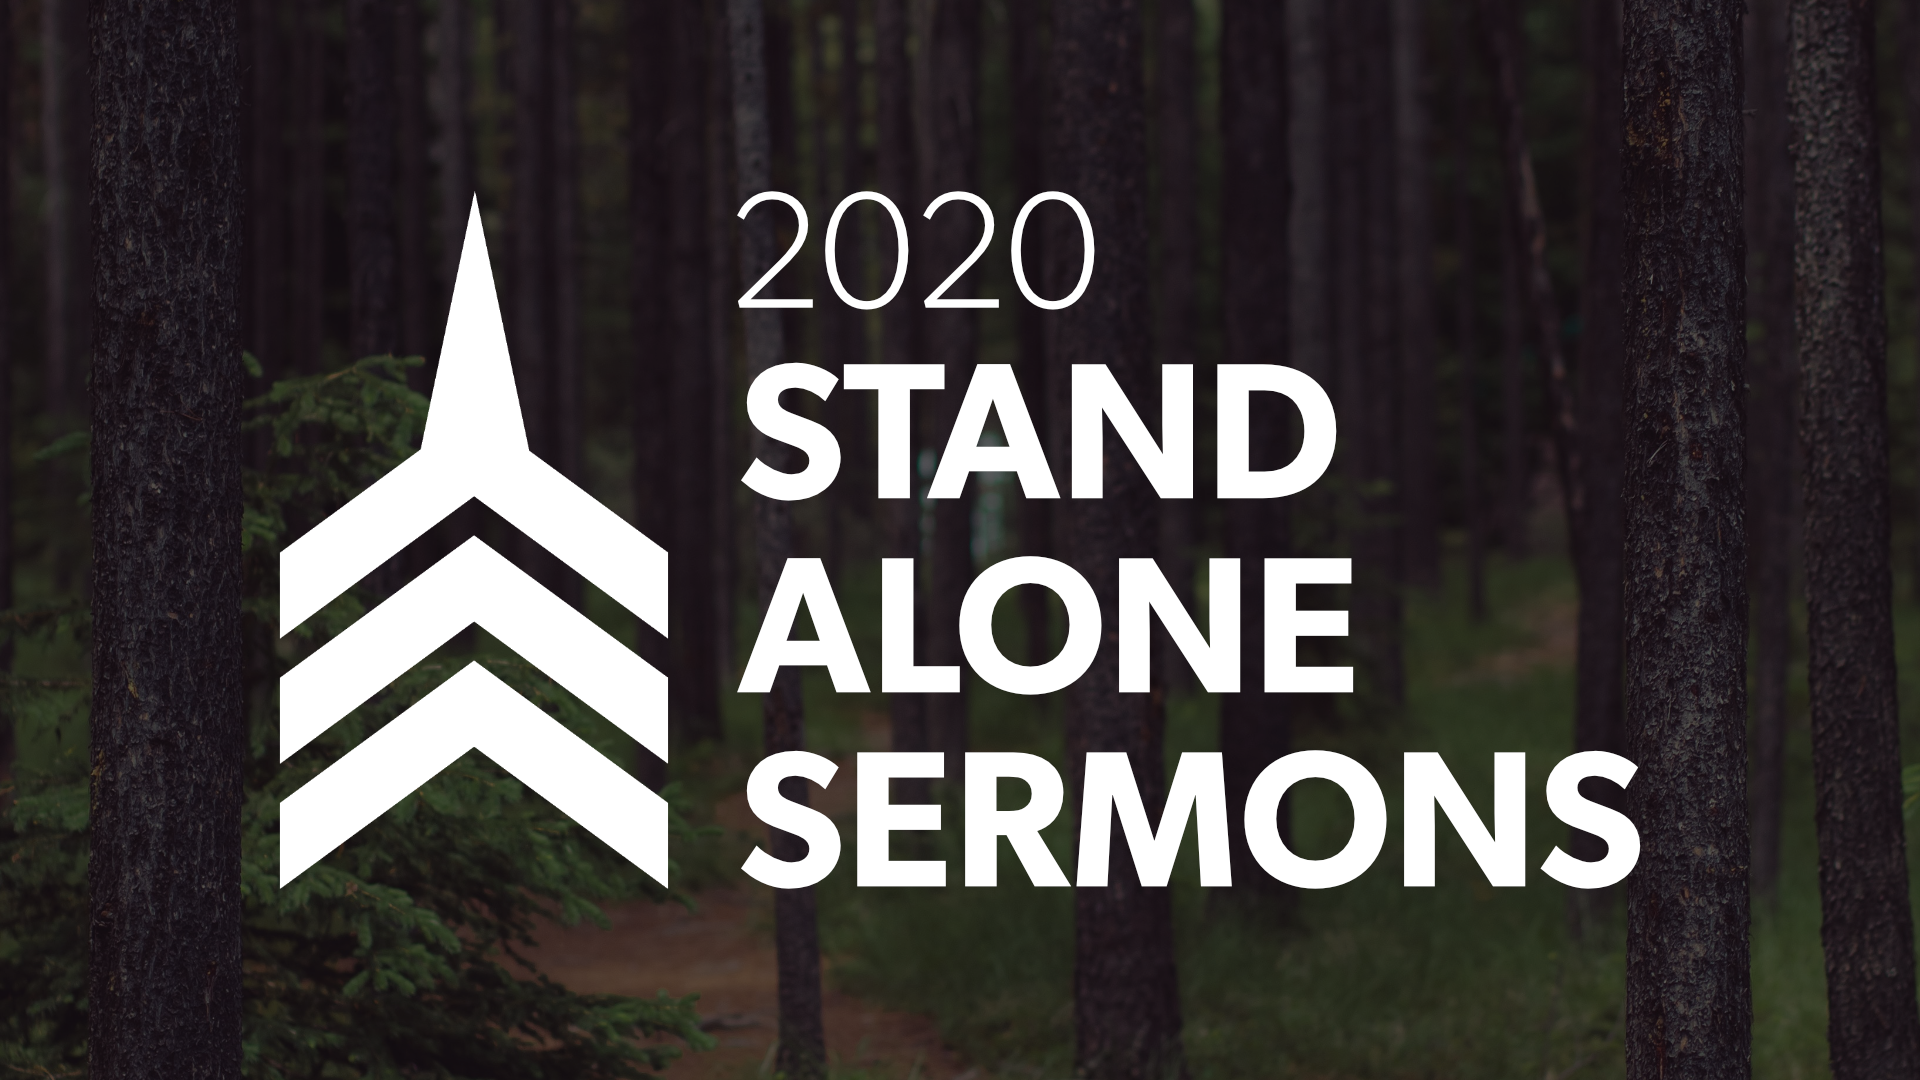 2020 STAND ALONE SERMONS.png